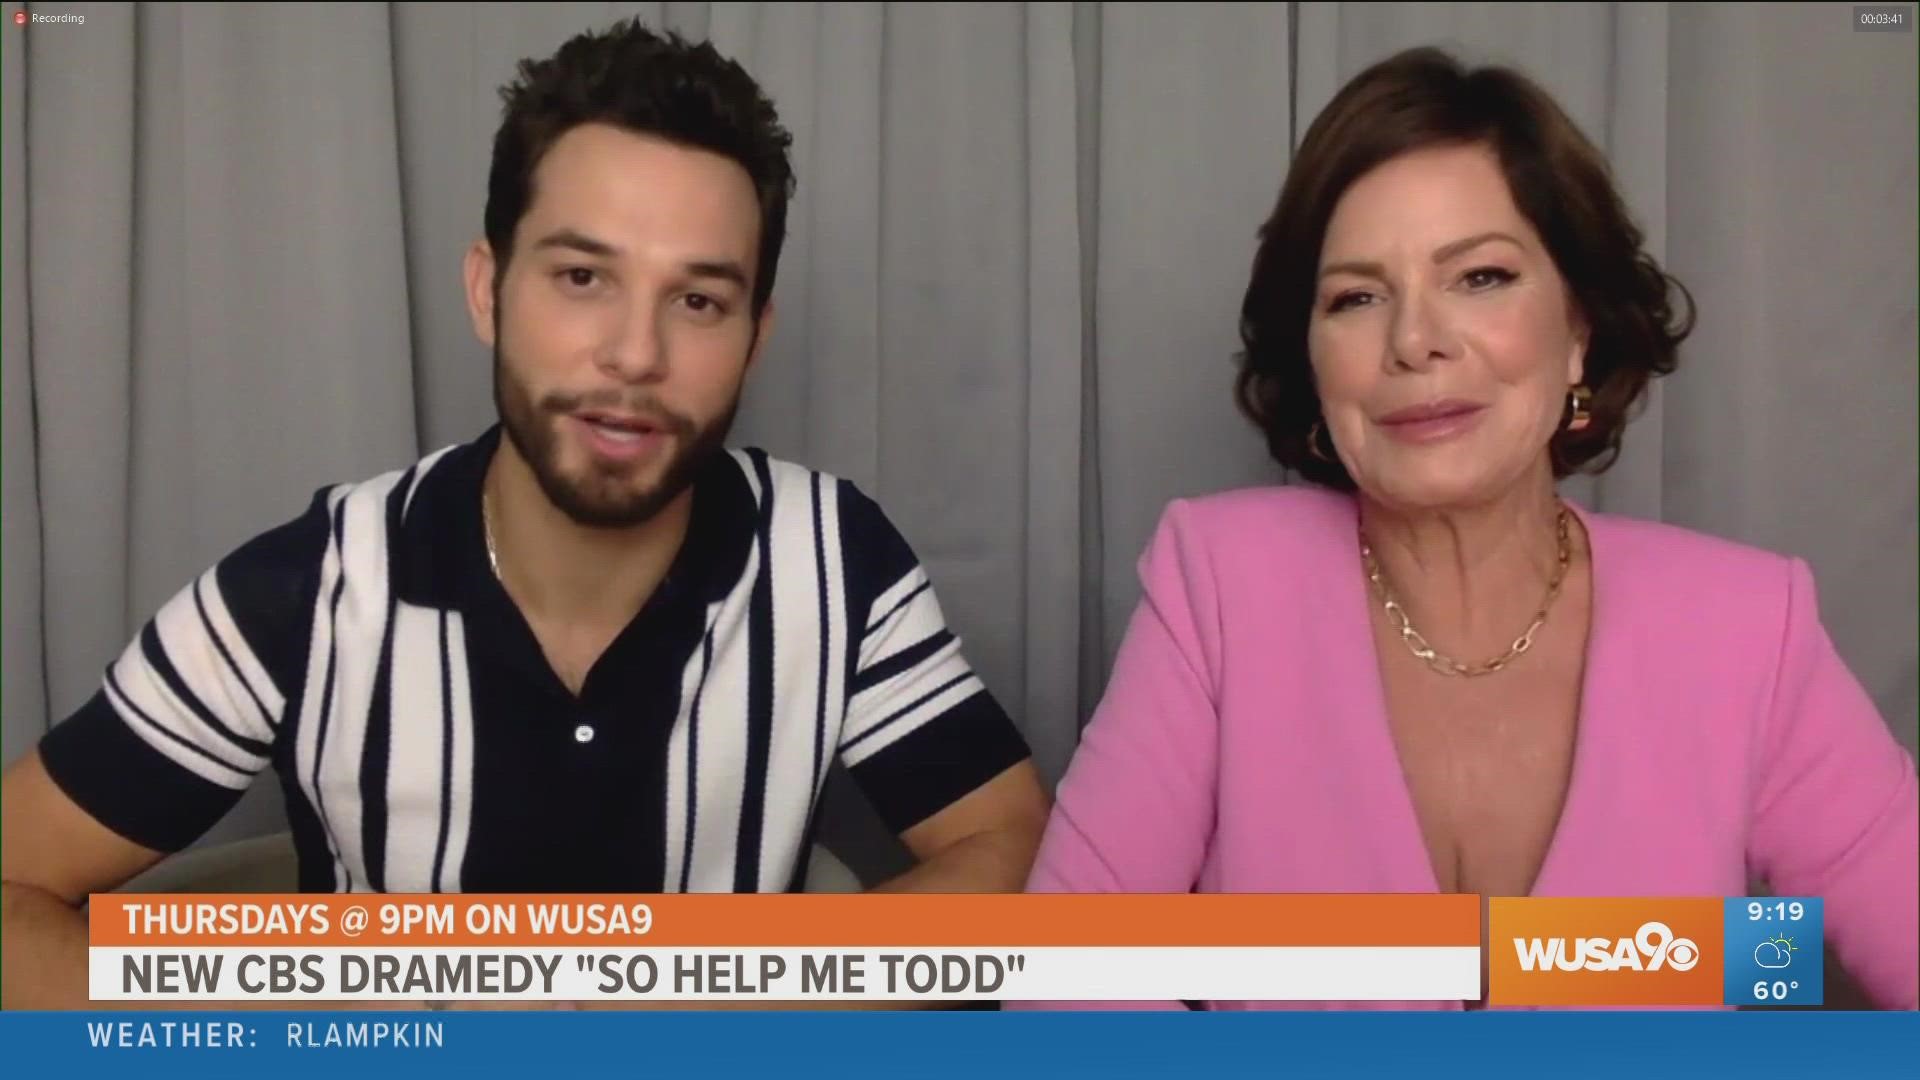 We get a first look at the new CBS show 'So Help me Todd' with Marcia Gay Harden and Skylar Astin.